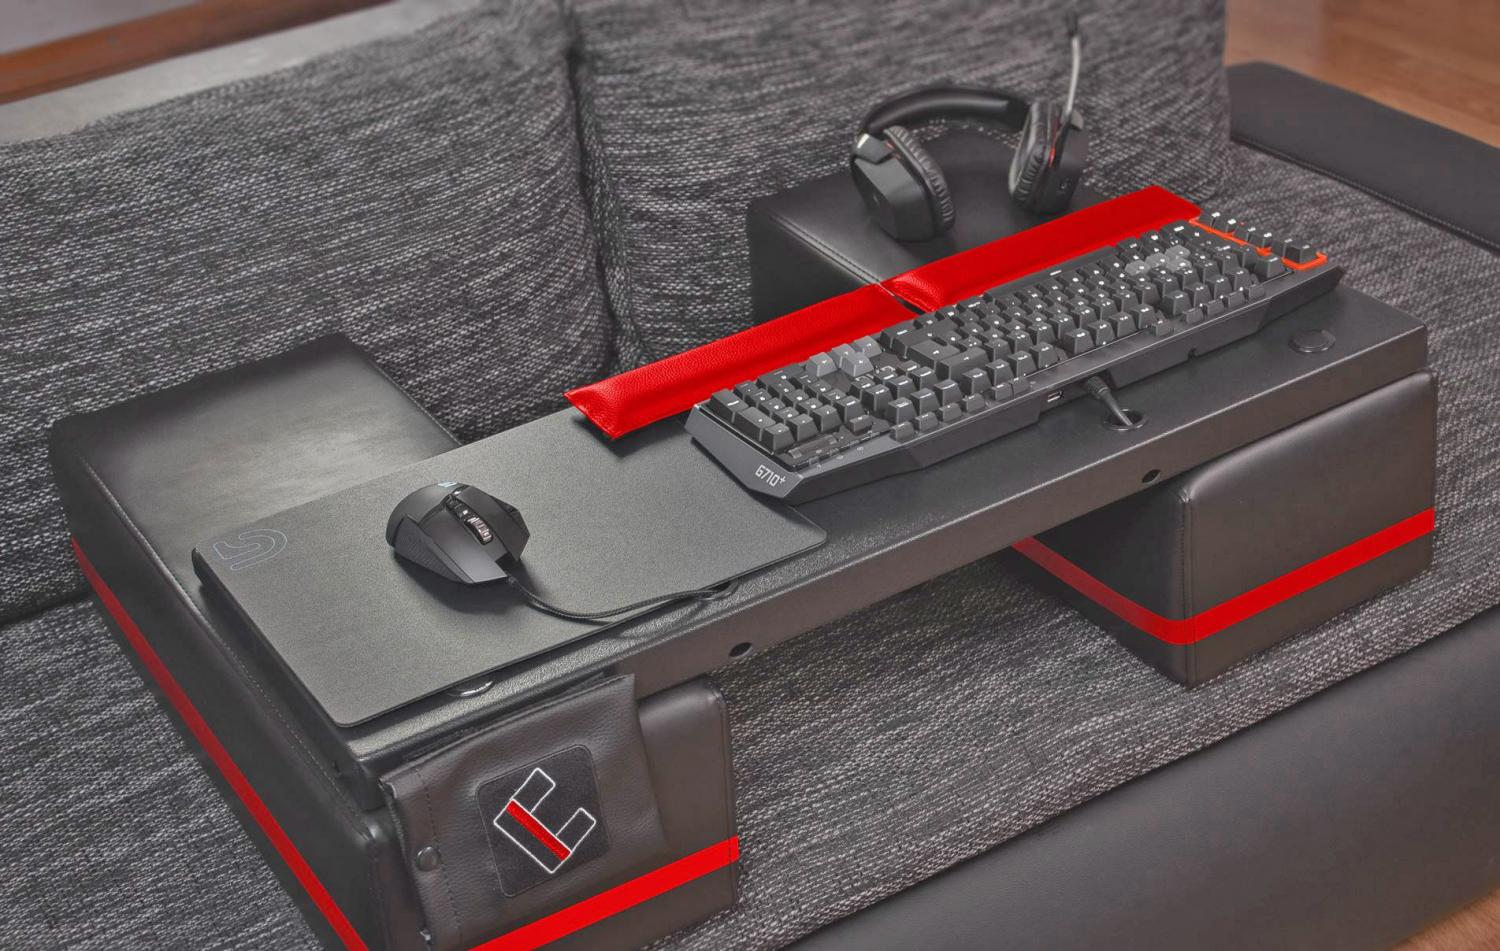 Couchmaster Is a Lap Desk That Creates a Workstation Right On Your Couch - Couch desk with cushion armrests